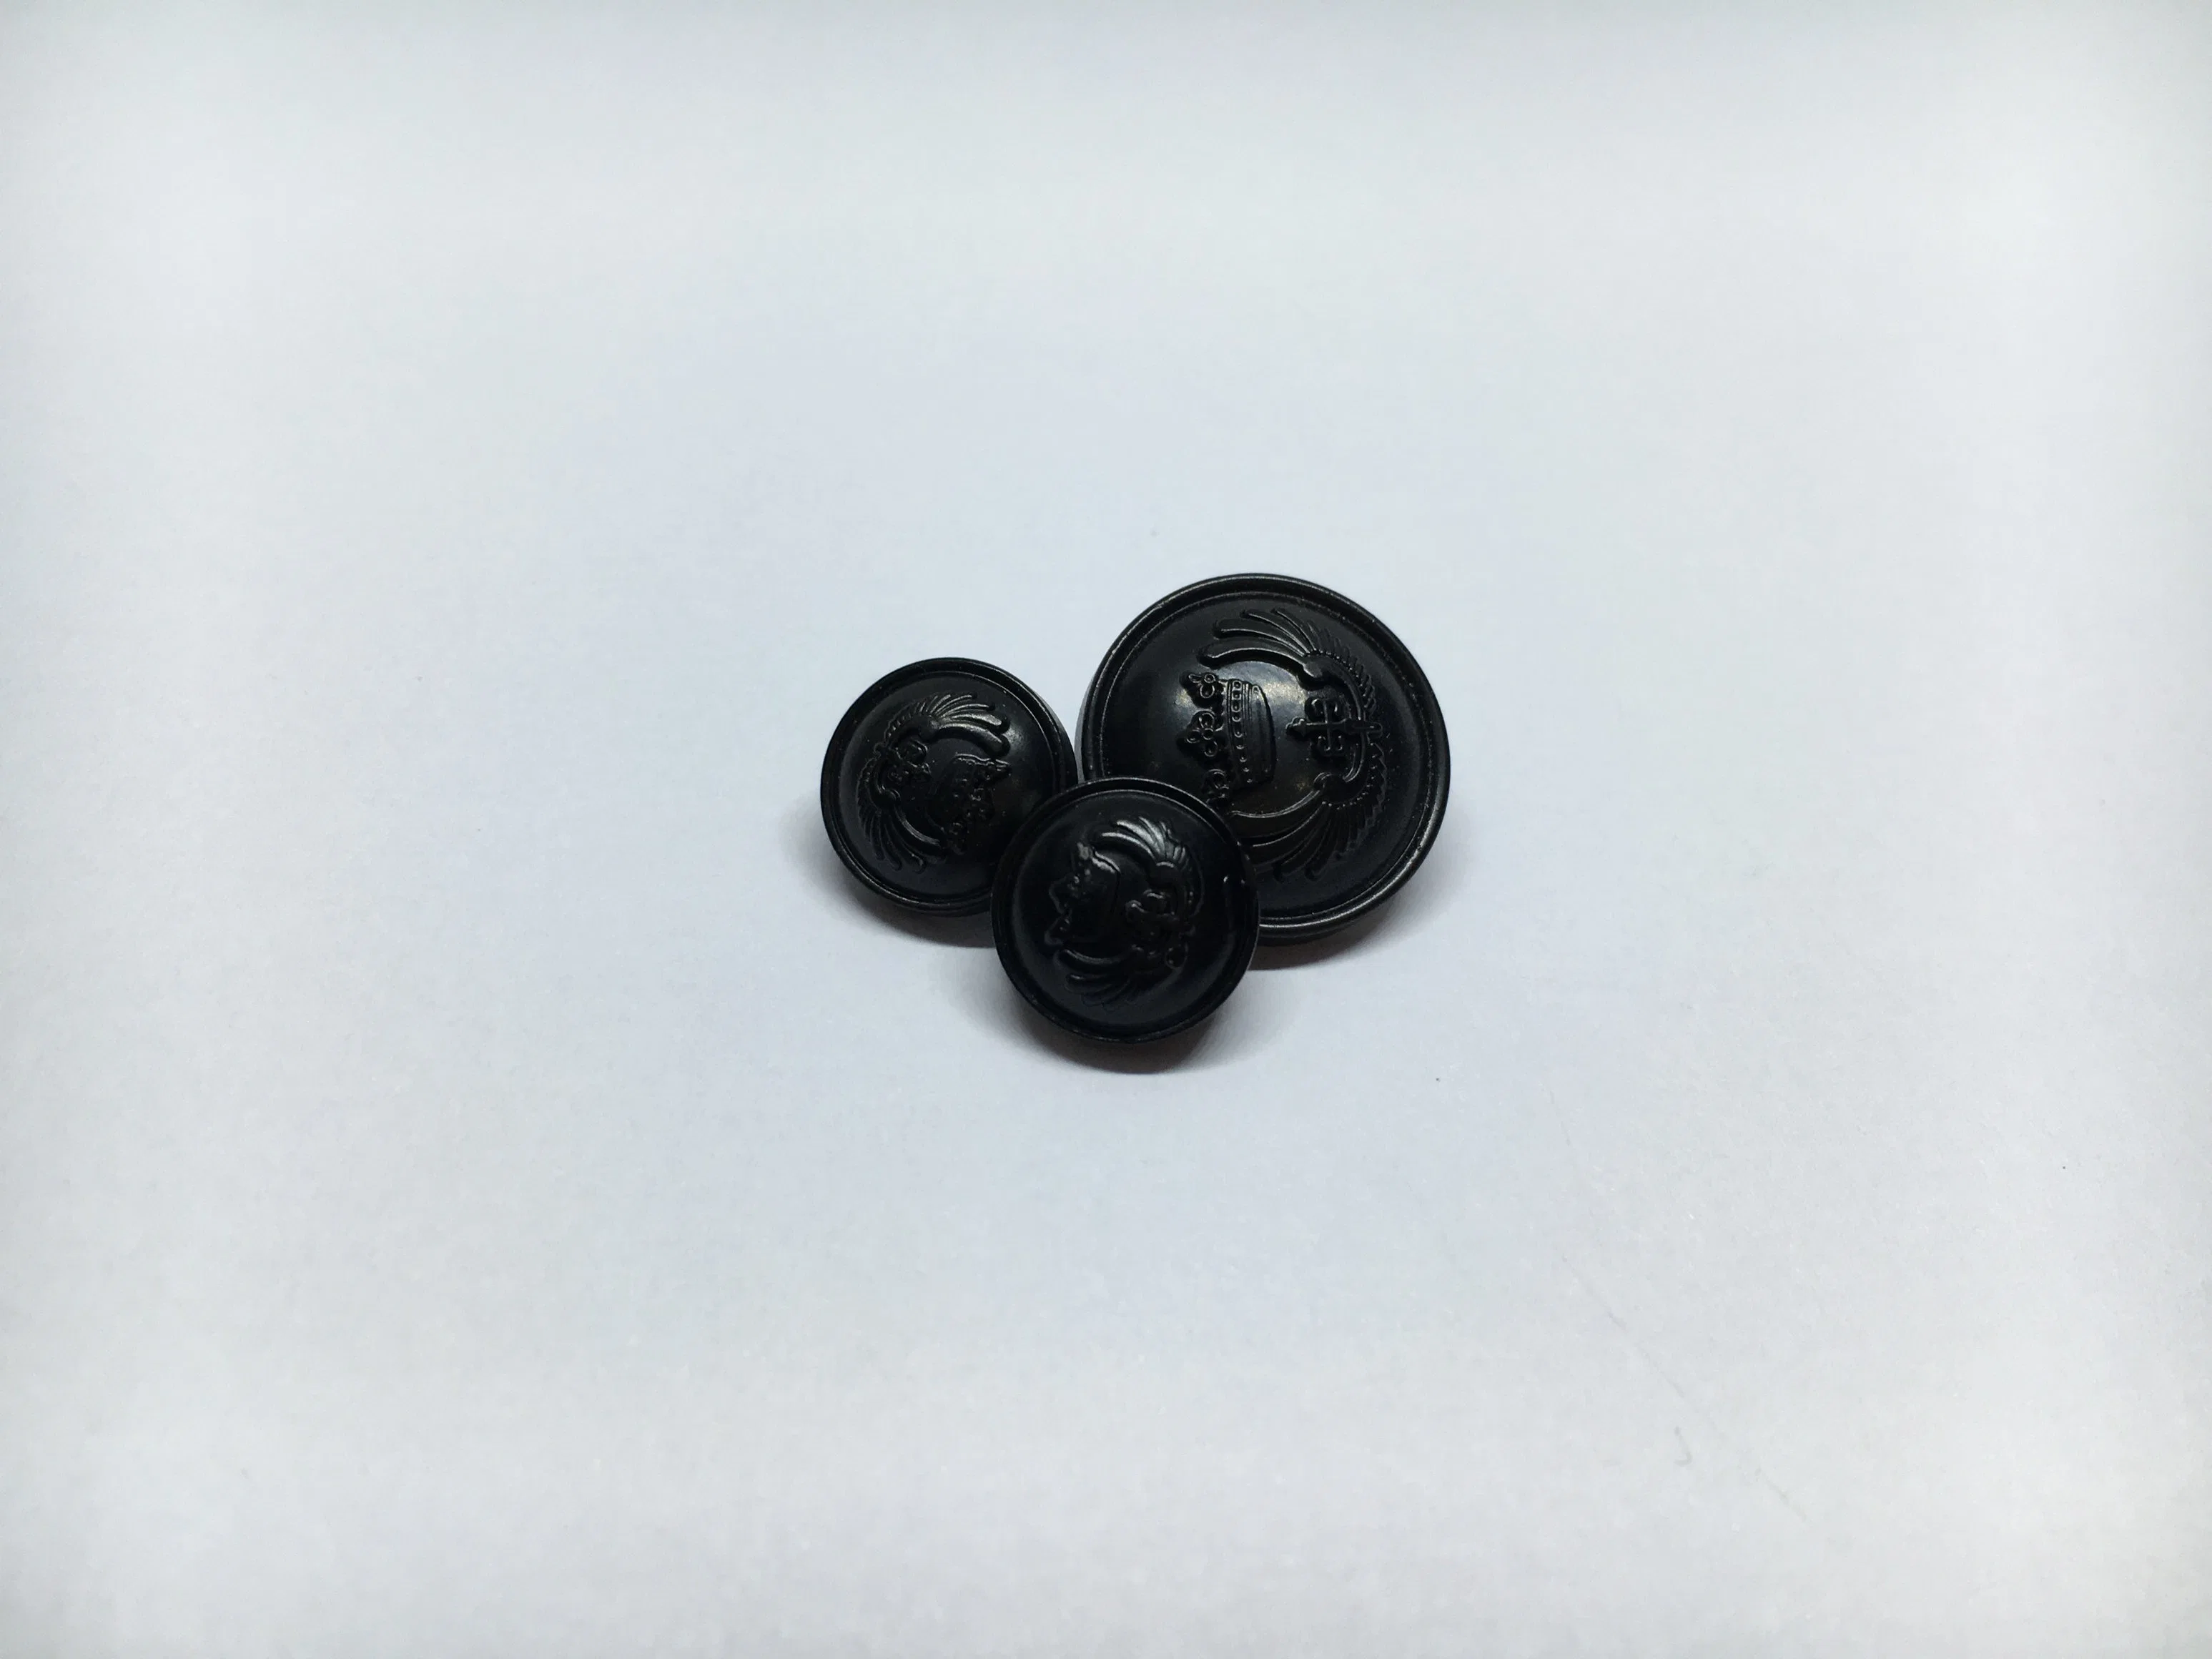 2017 Hot Selling Fashion Metal Button for Garment Apparel Clothing